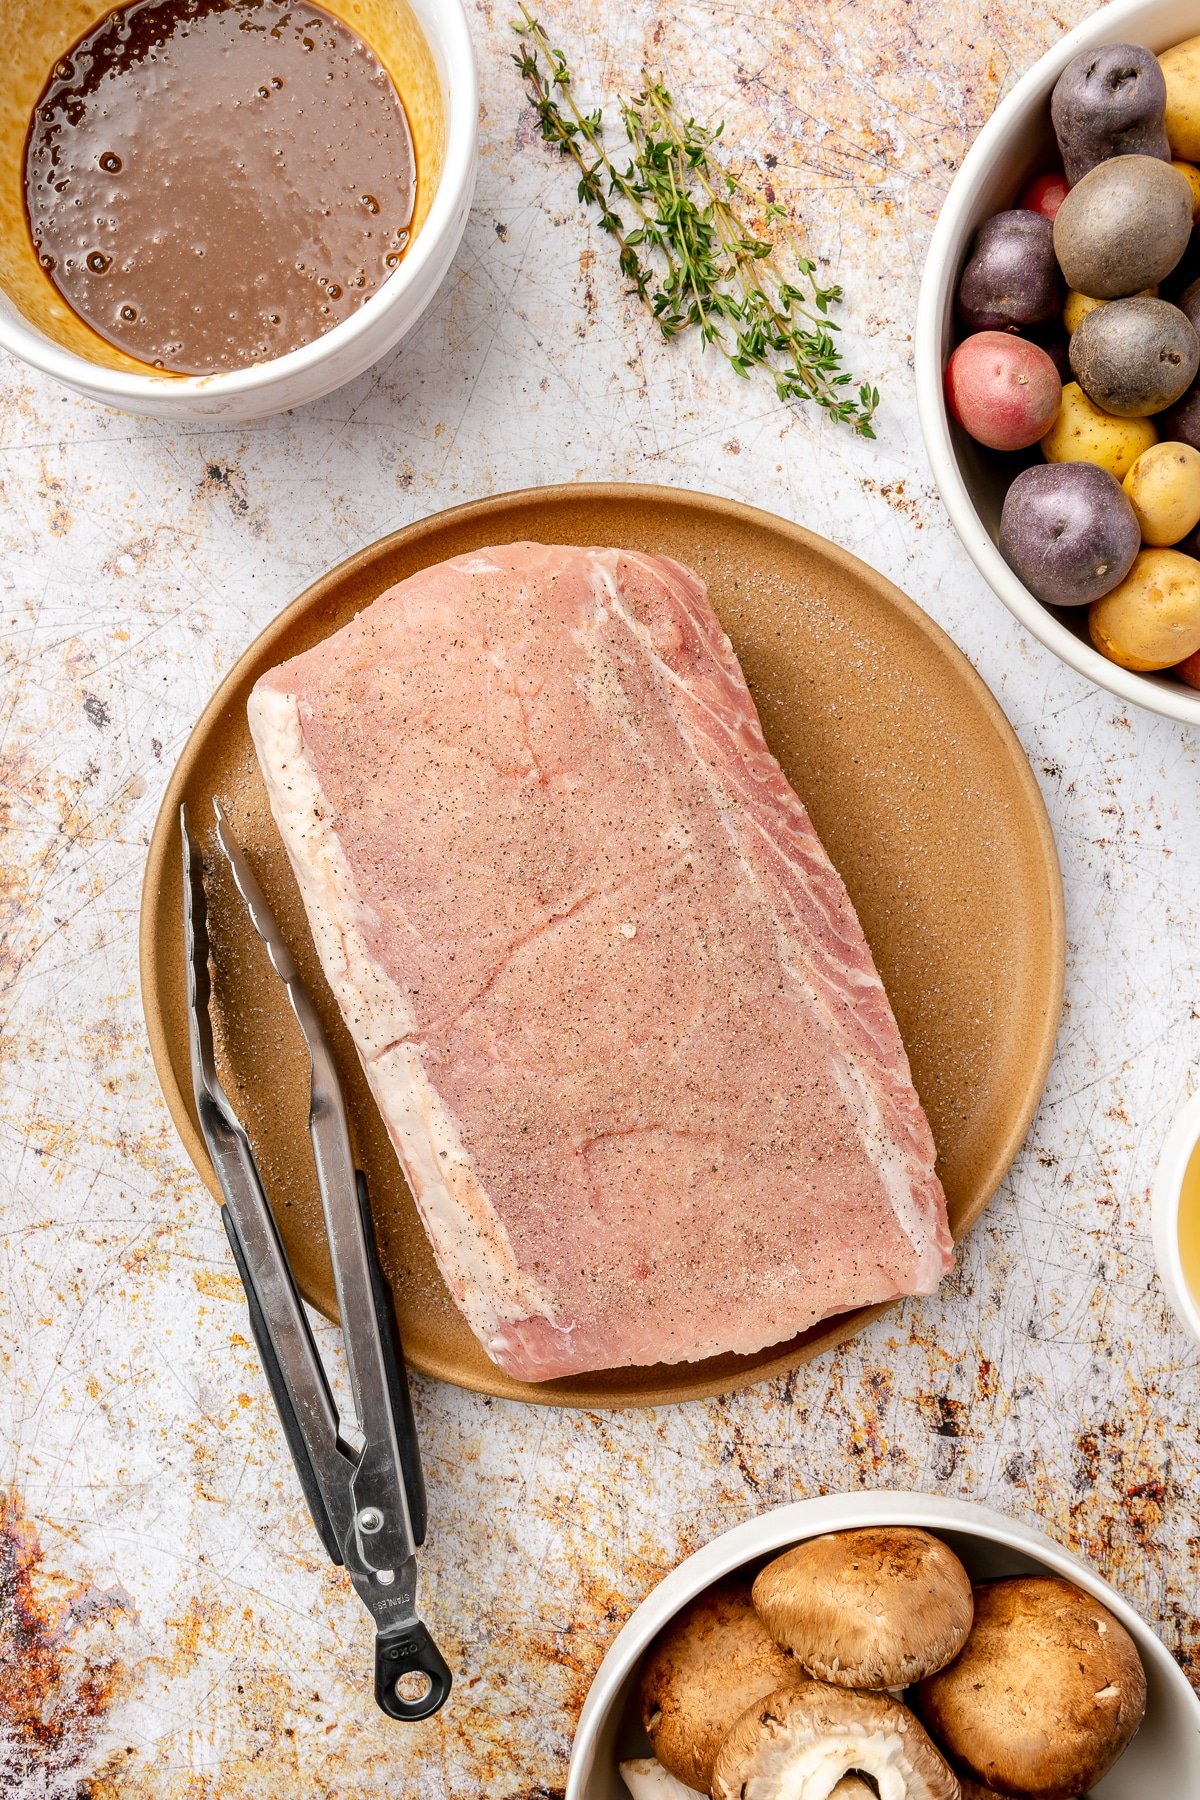 The seasoning mixture has been rubbed on the surface of a pork loin which sits on a brown plate. A black set of tongs sit on the side.